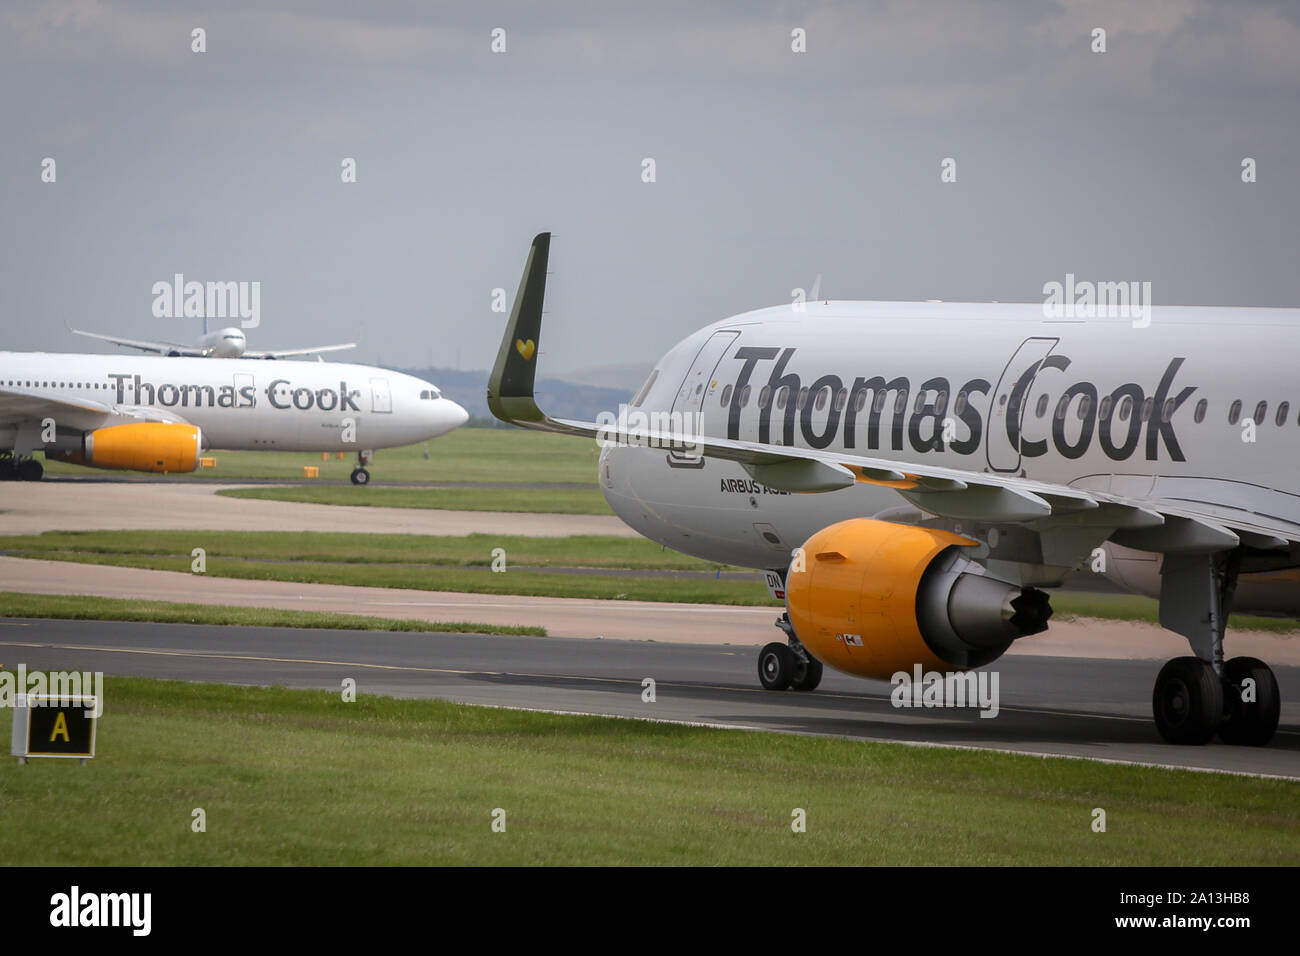 (File image) Thomas Cook civil jet airliners captured at Manchester International Airport, Great Britain. As reported on Monday, 23 Sep 2019, Thomas Cook Group Plc, the 178-year travel company that became one of the U.K.’s best-known brands, has collapsed under a pile of debt, leaving tens of thousands of British tourists stranded across Europe. Stock Photo